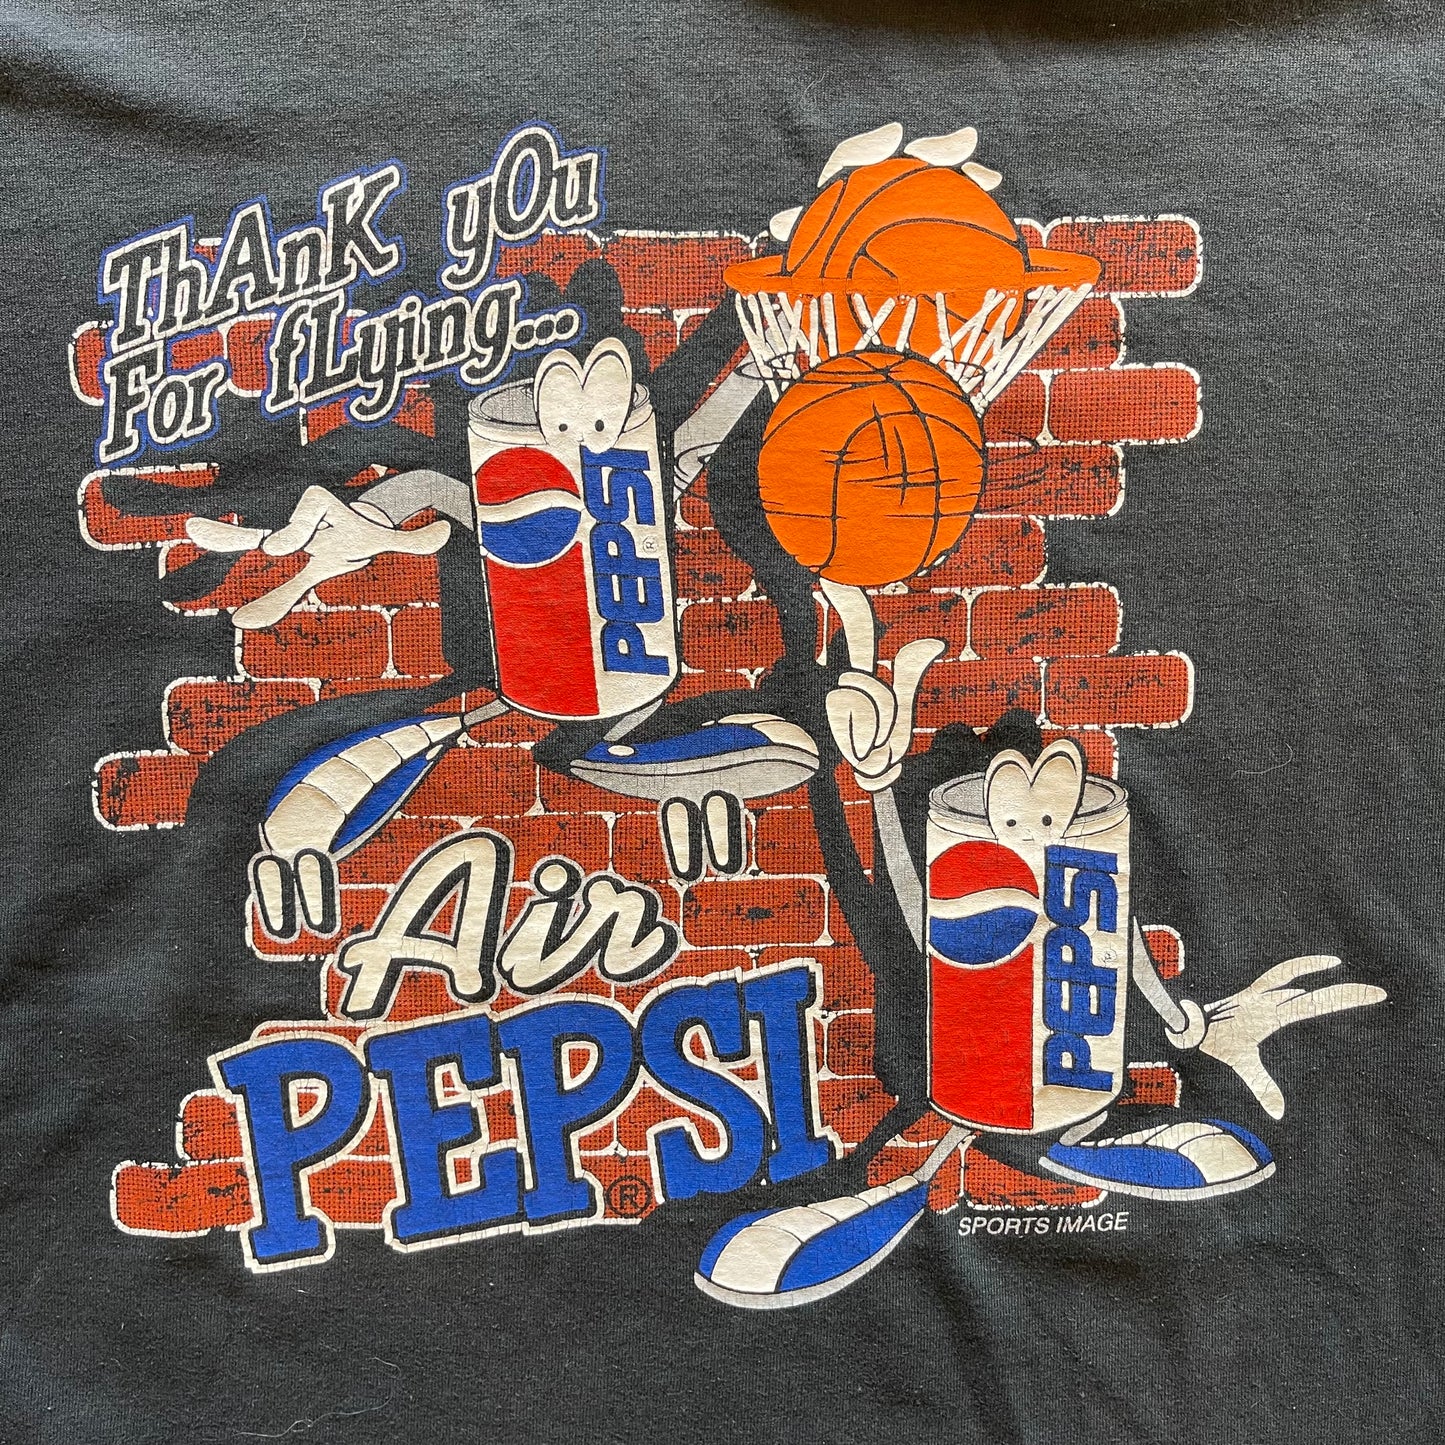 Thank You For Flying Pepsi Vintage T-shirt